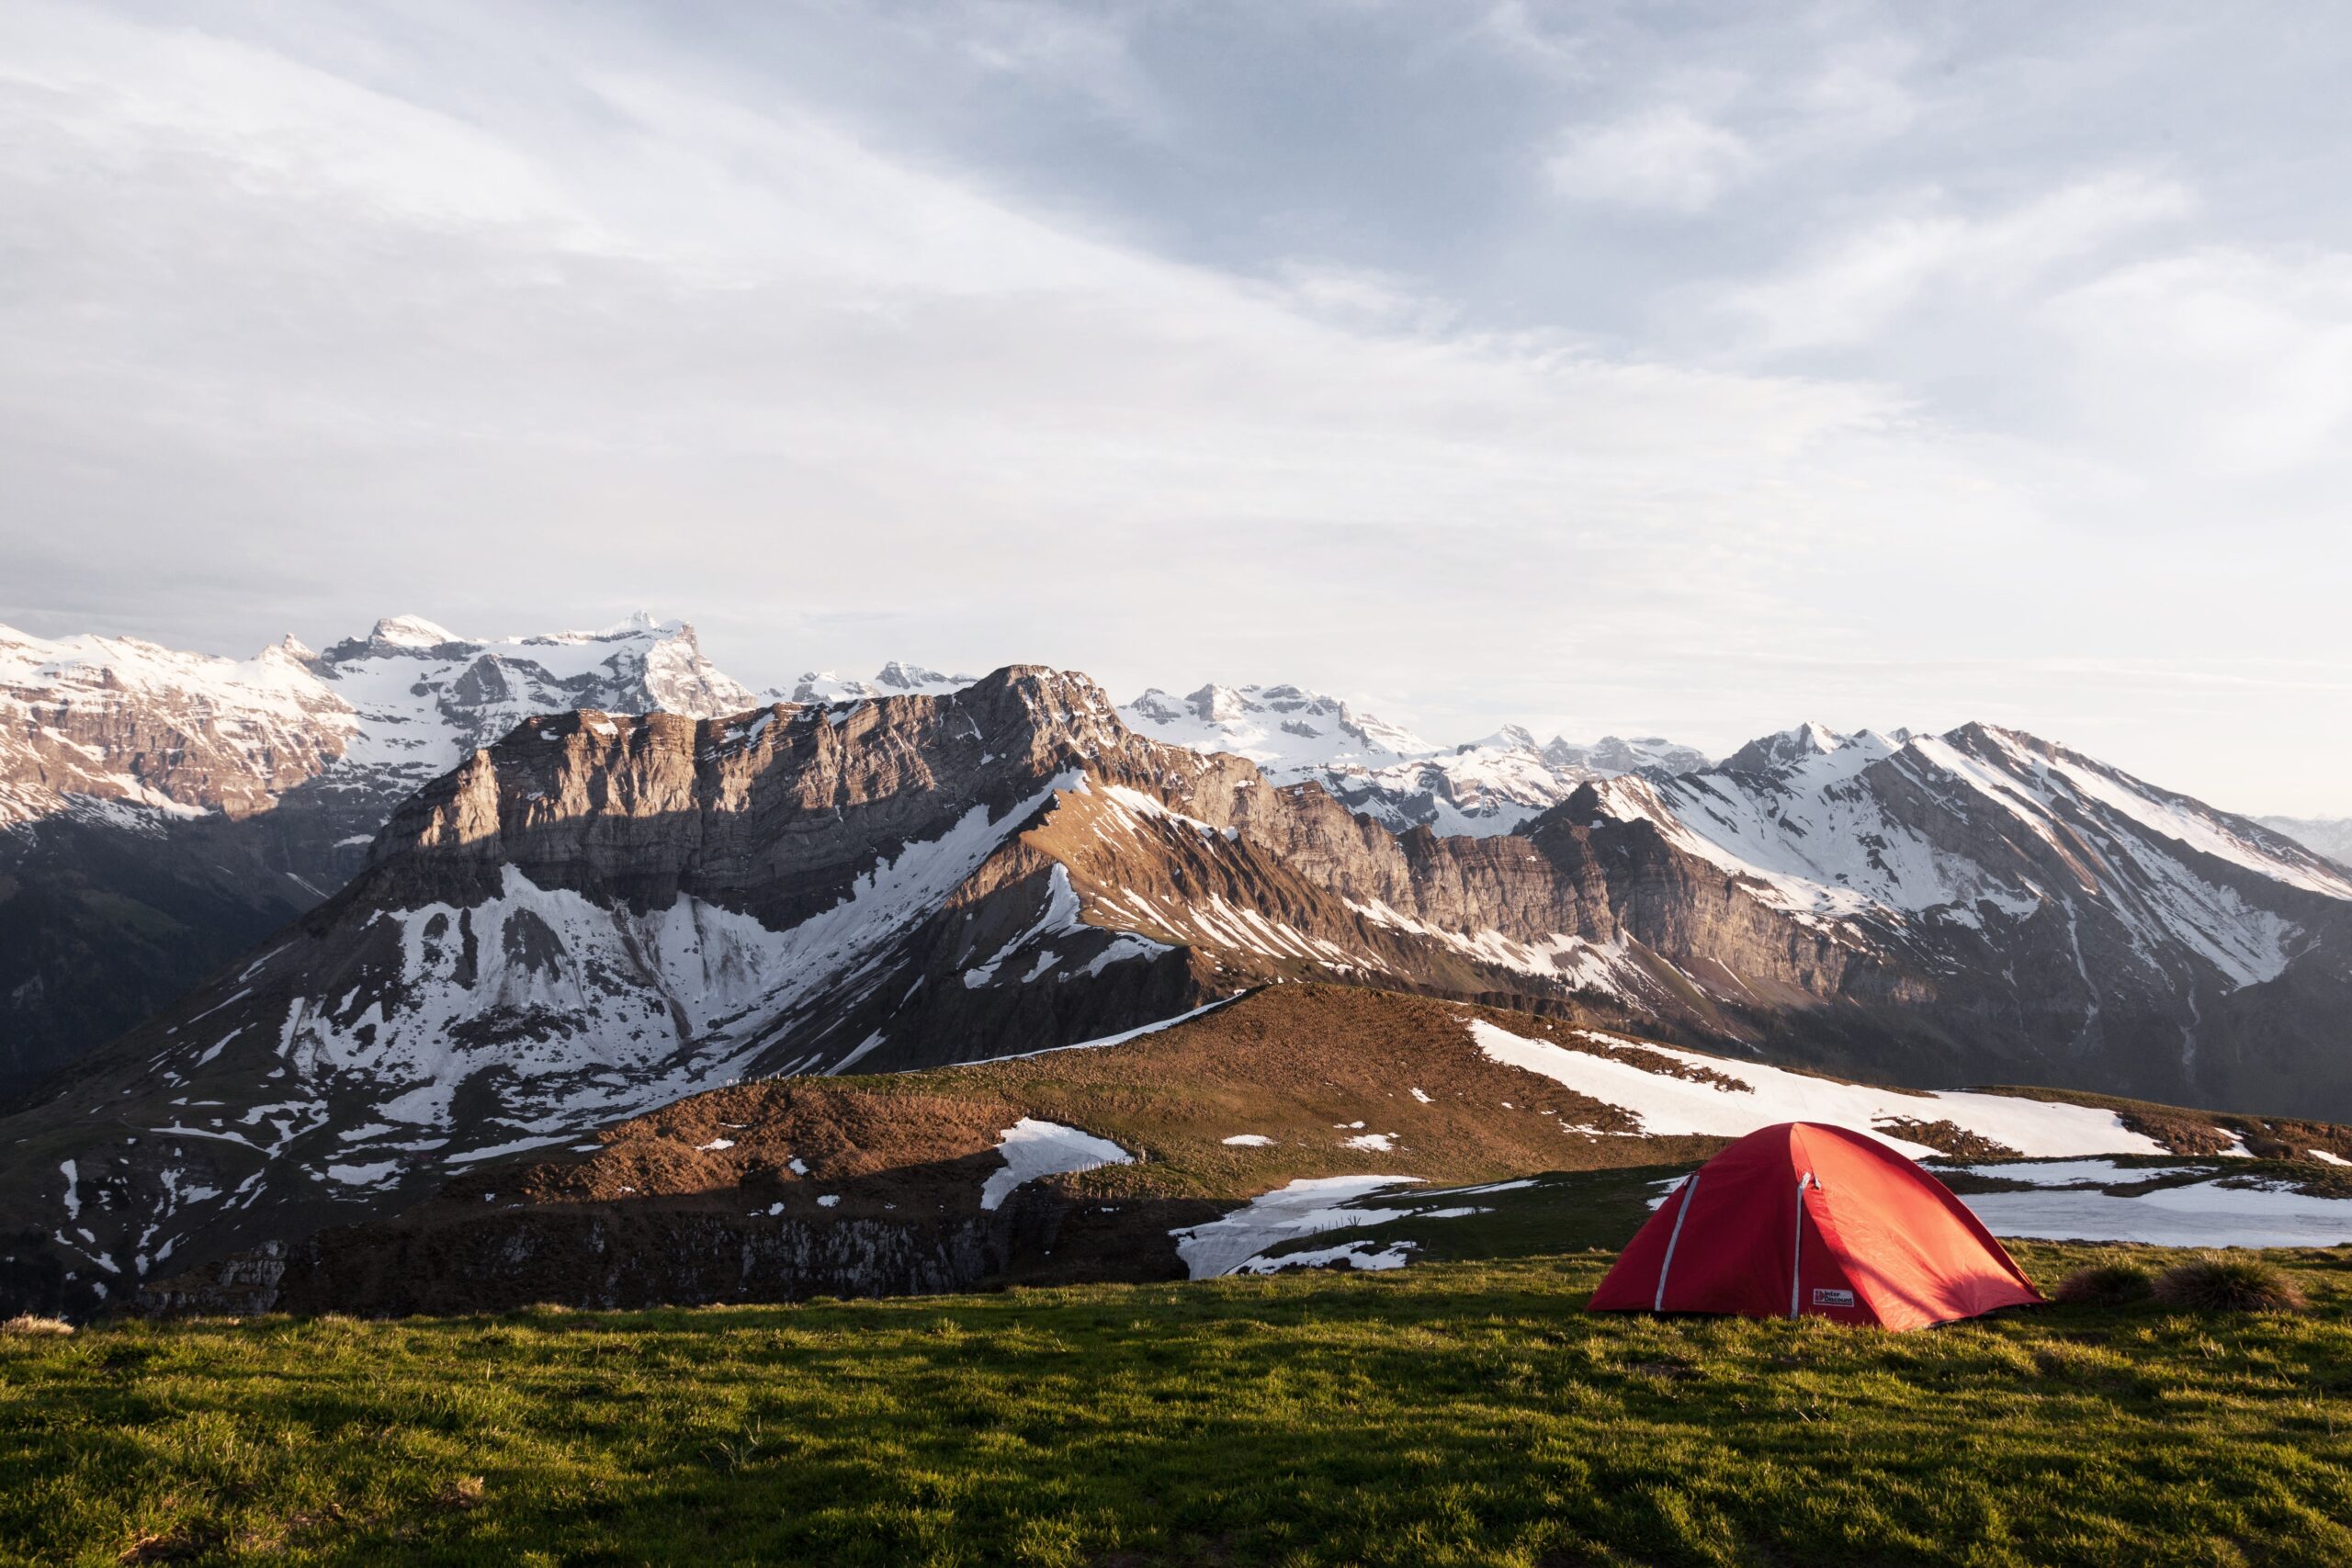 A camping site in the mountains